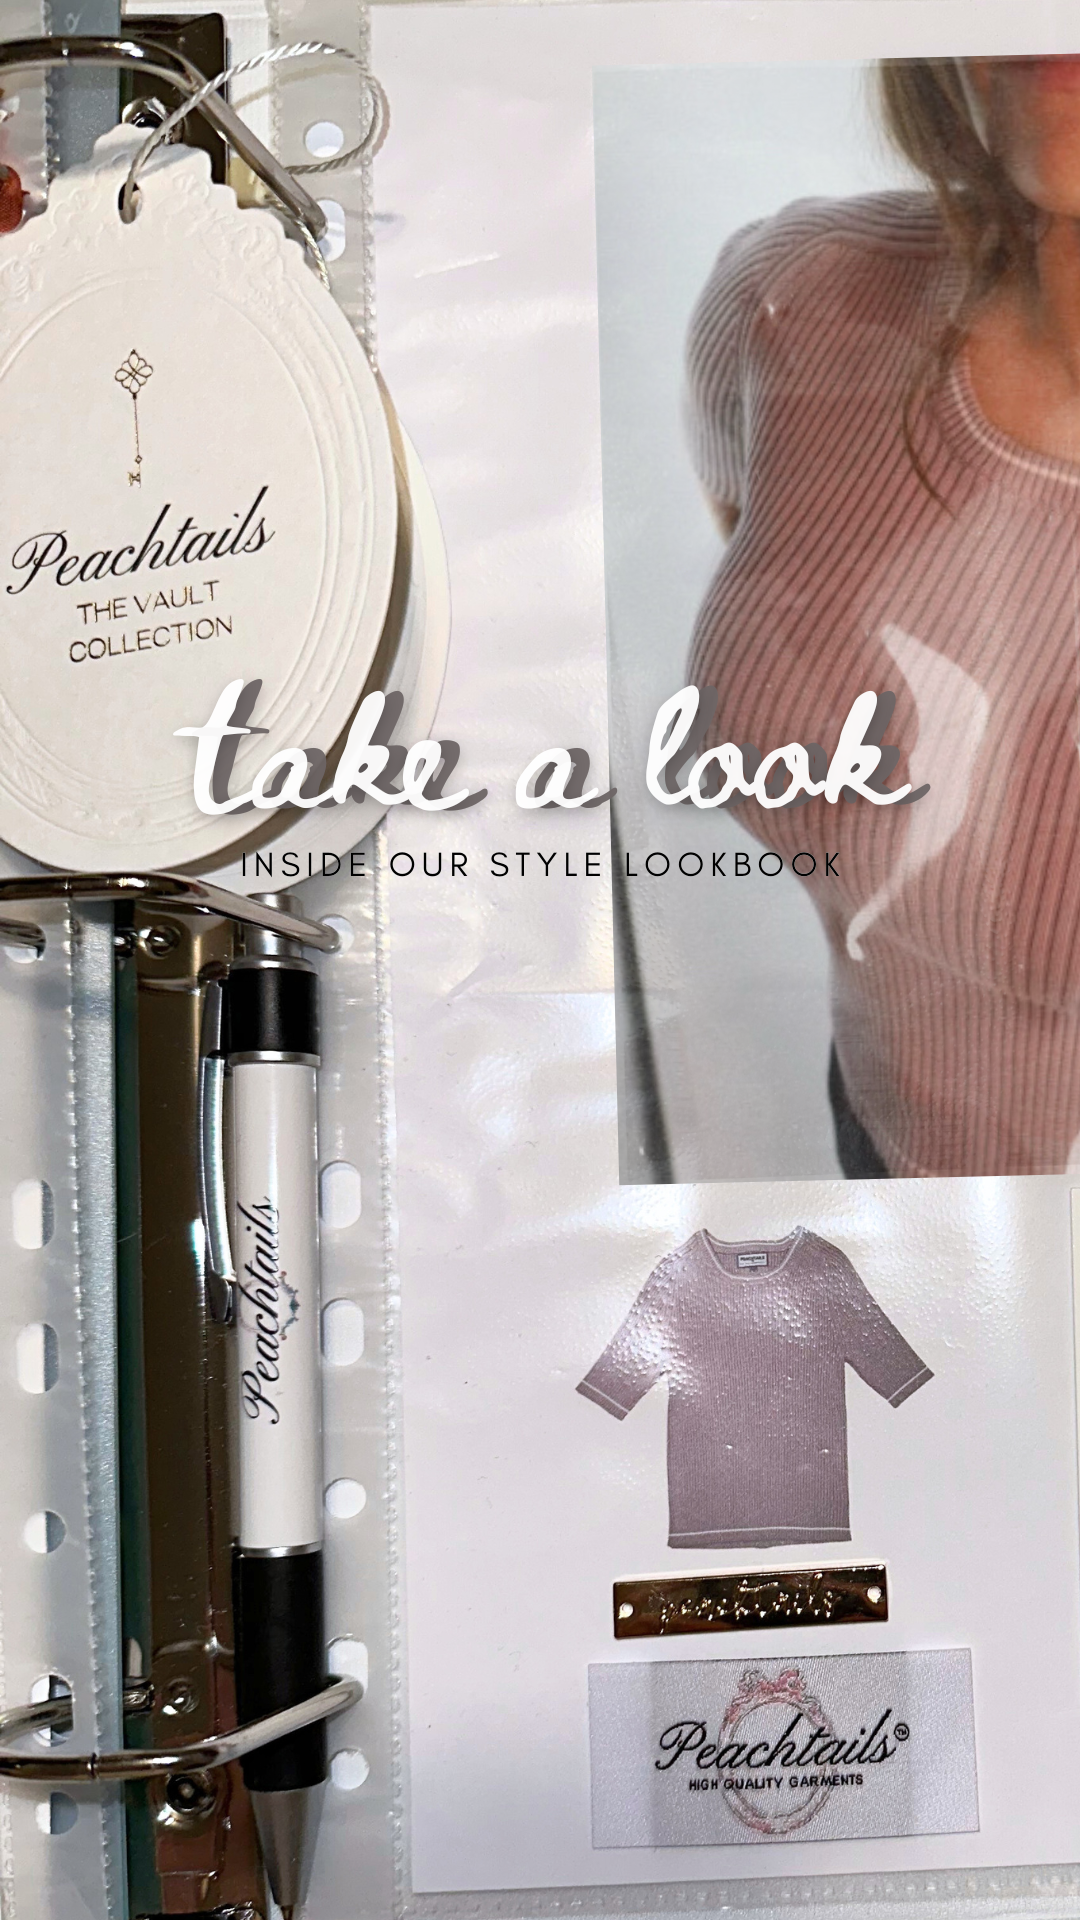 The image is a promotional piece for Peachtails, featuring a part of a woman in a pink knit garment through plastic packaging, with the words "take a look INSIDE OUR STYLE LOOKBOOK" in large, semi-transparent letters across. To the left, there's a set of ring-bound Peachtails documents, and below the text is a Peachtails business card and what appears to be a fabric swatch or miniaturized T-shirt. It creates an impression of a fashion brand's marketing materials, exuding a sense of style and sophistication.